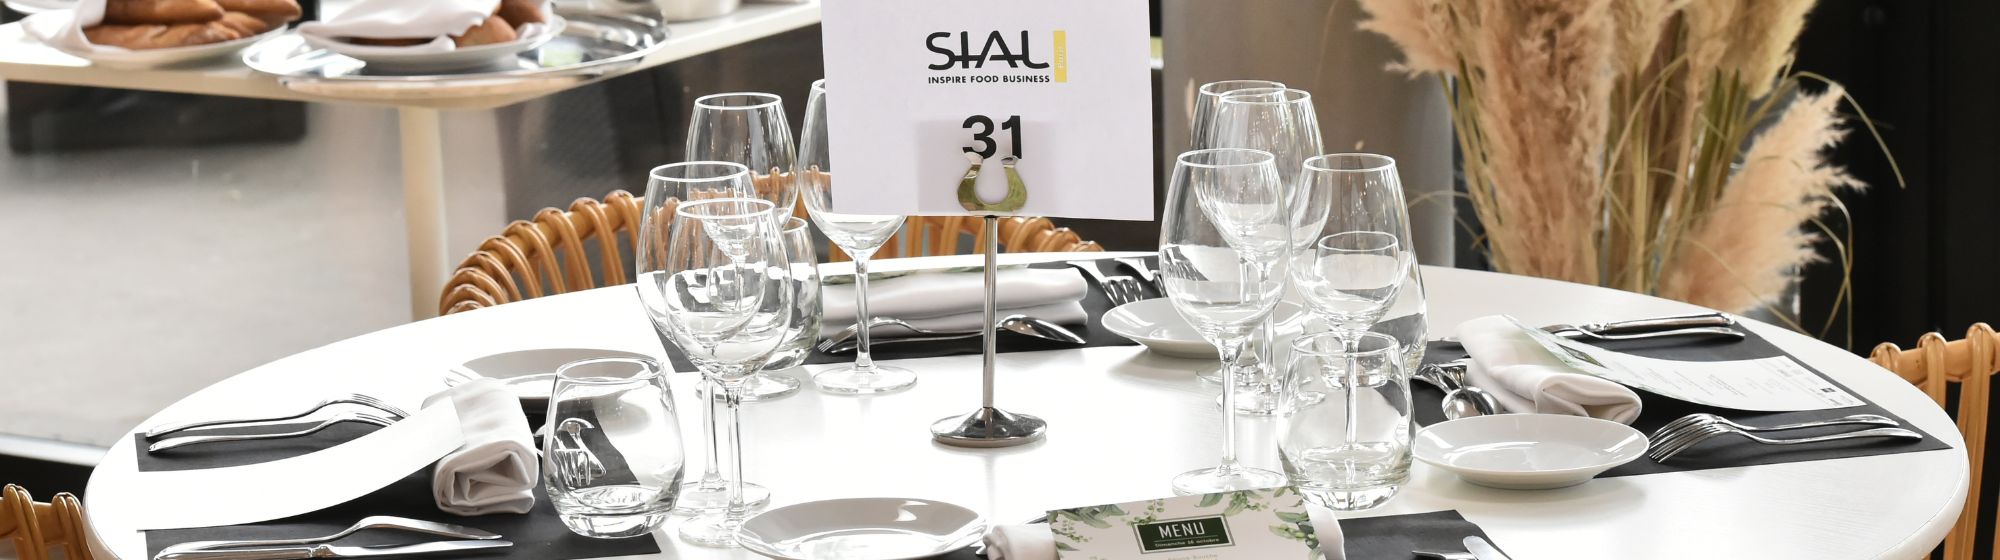 Book your lunch at SIAL Le Restaurant